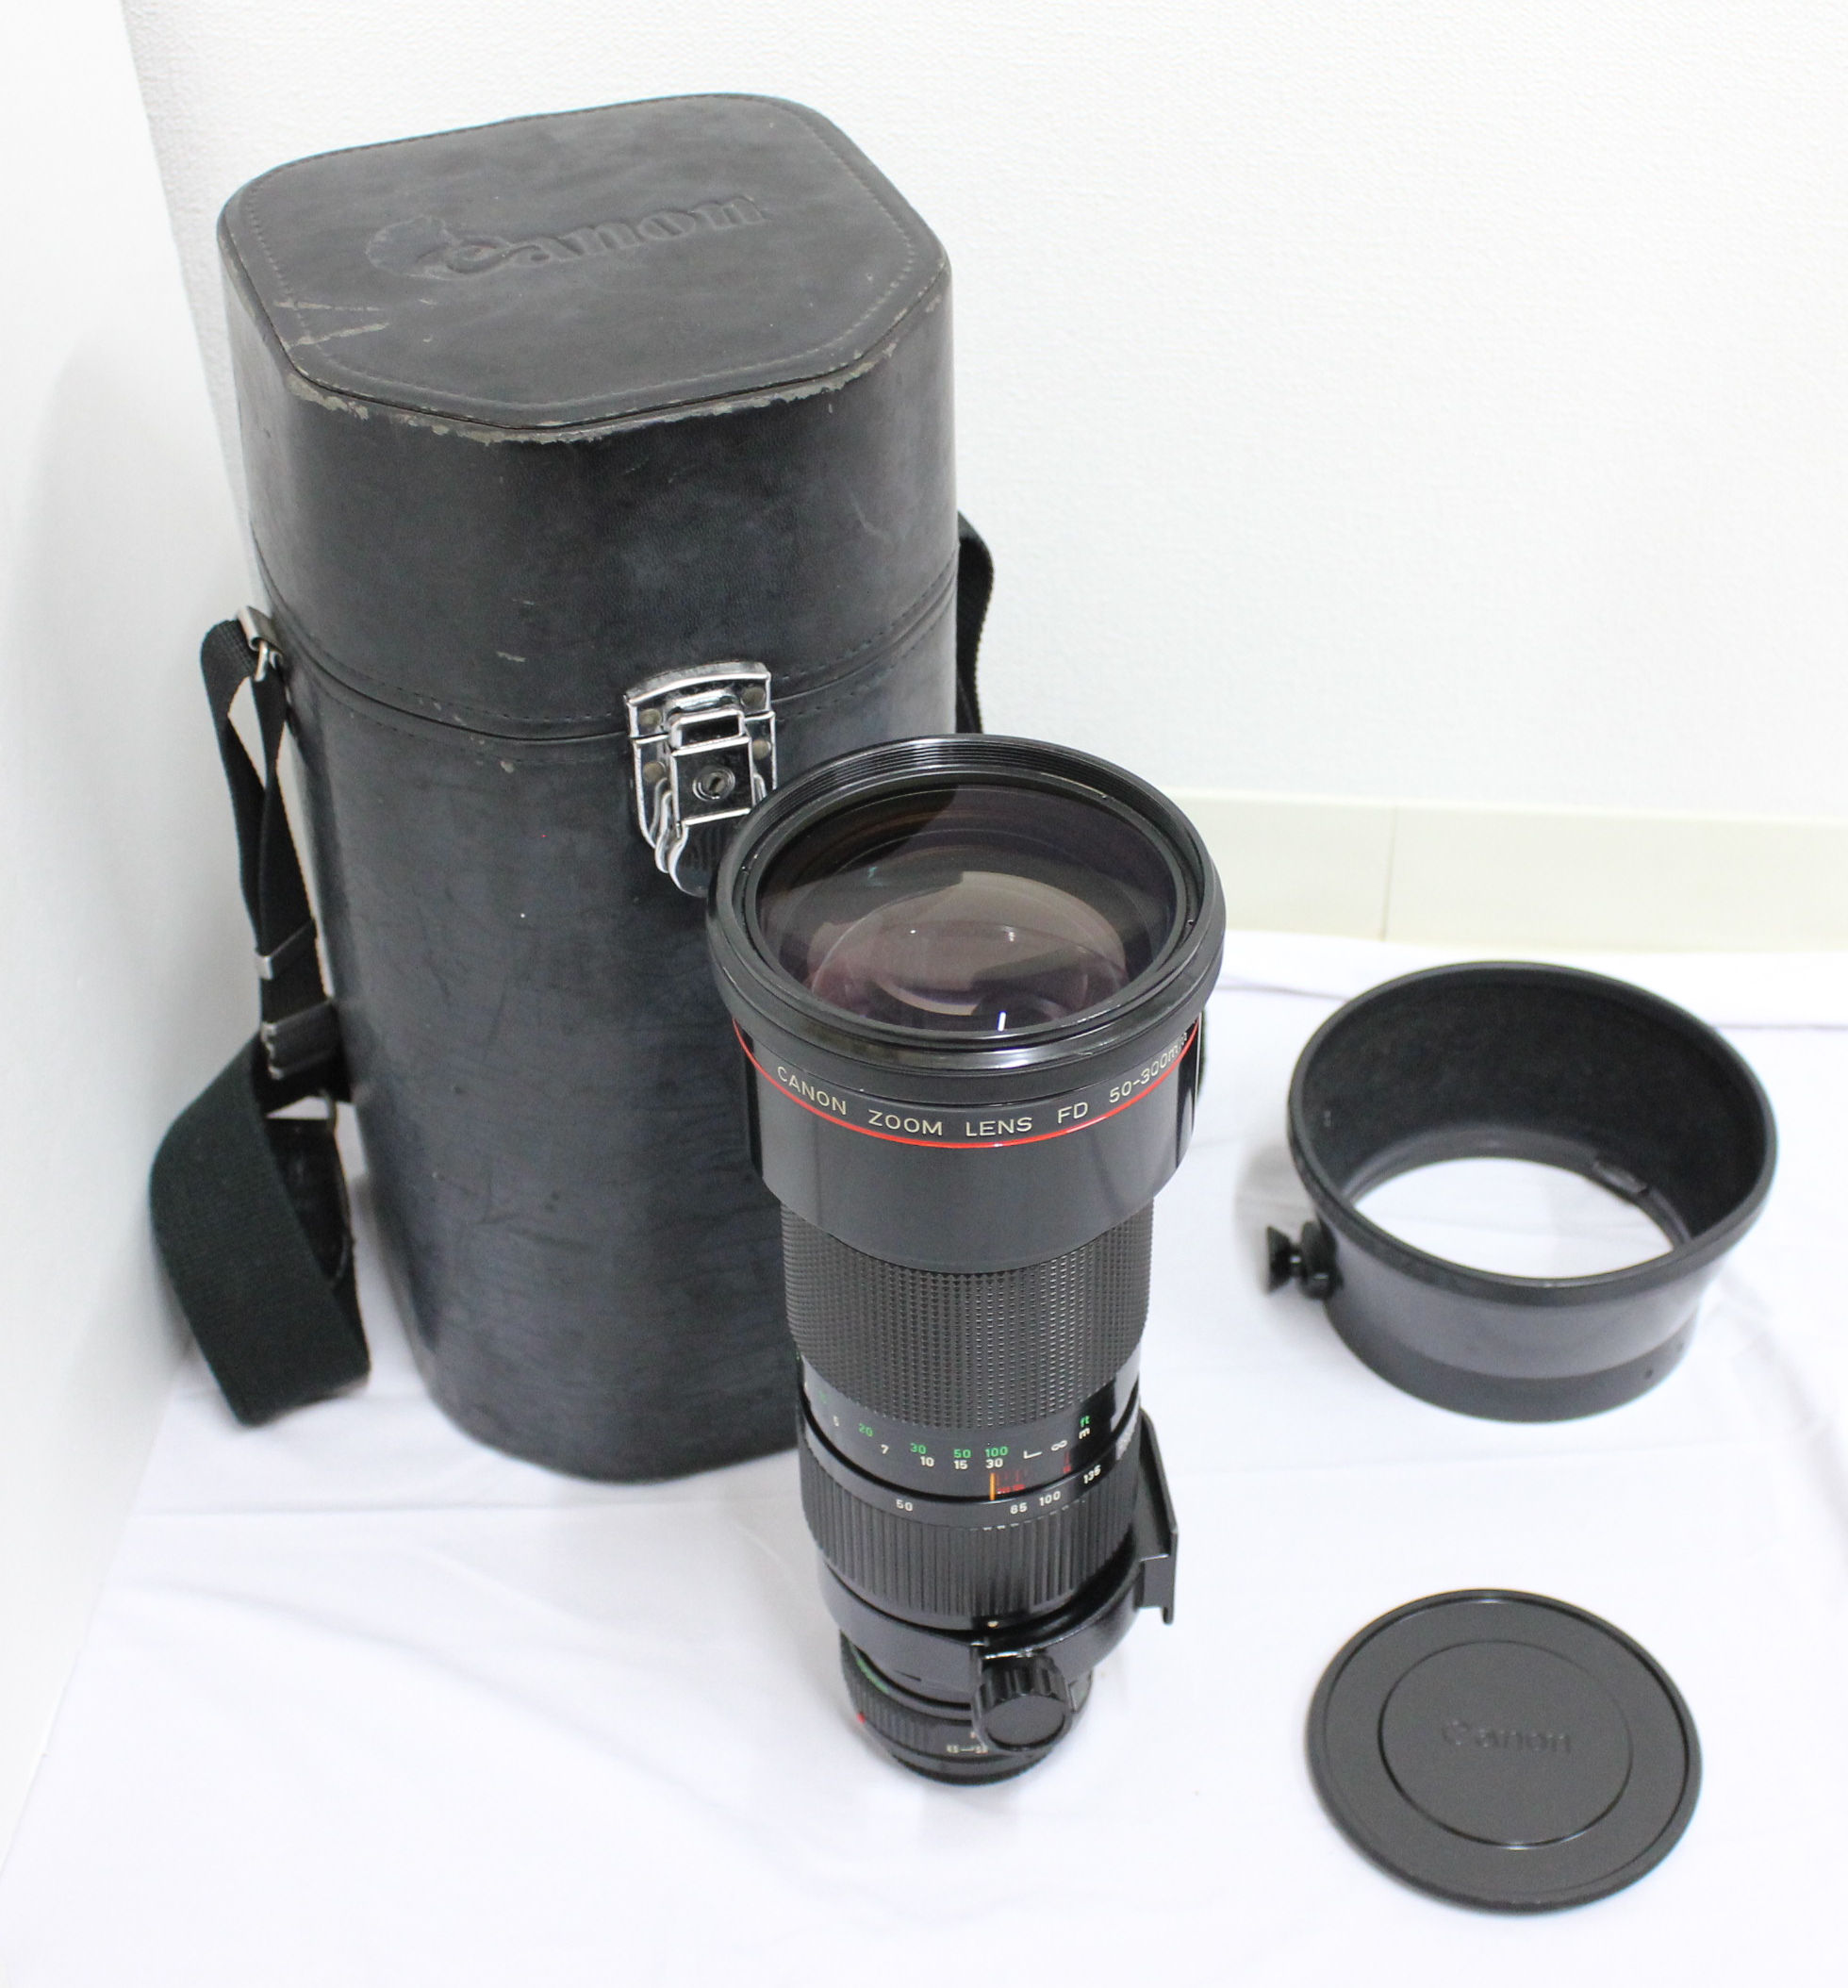 Japan Used Camera Shop | [Mint] Canon NEW FD 50-300mm F4.5 L Lens with Hood and Case from Japan